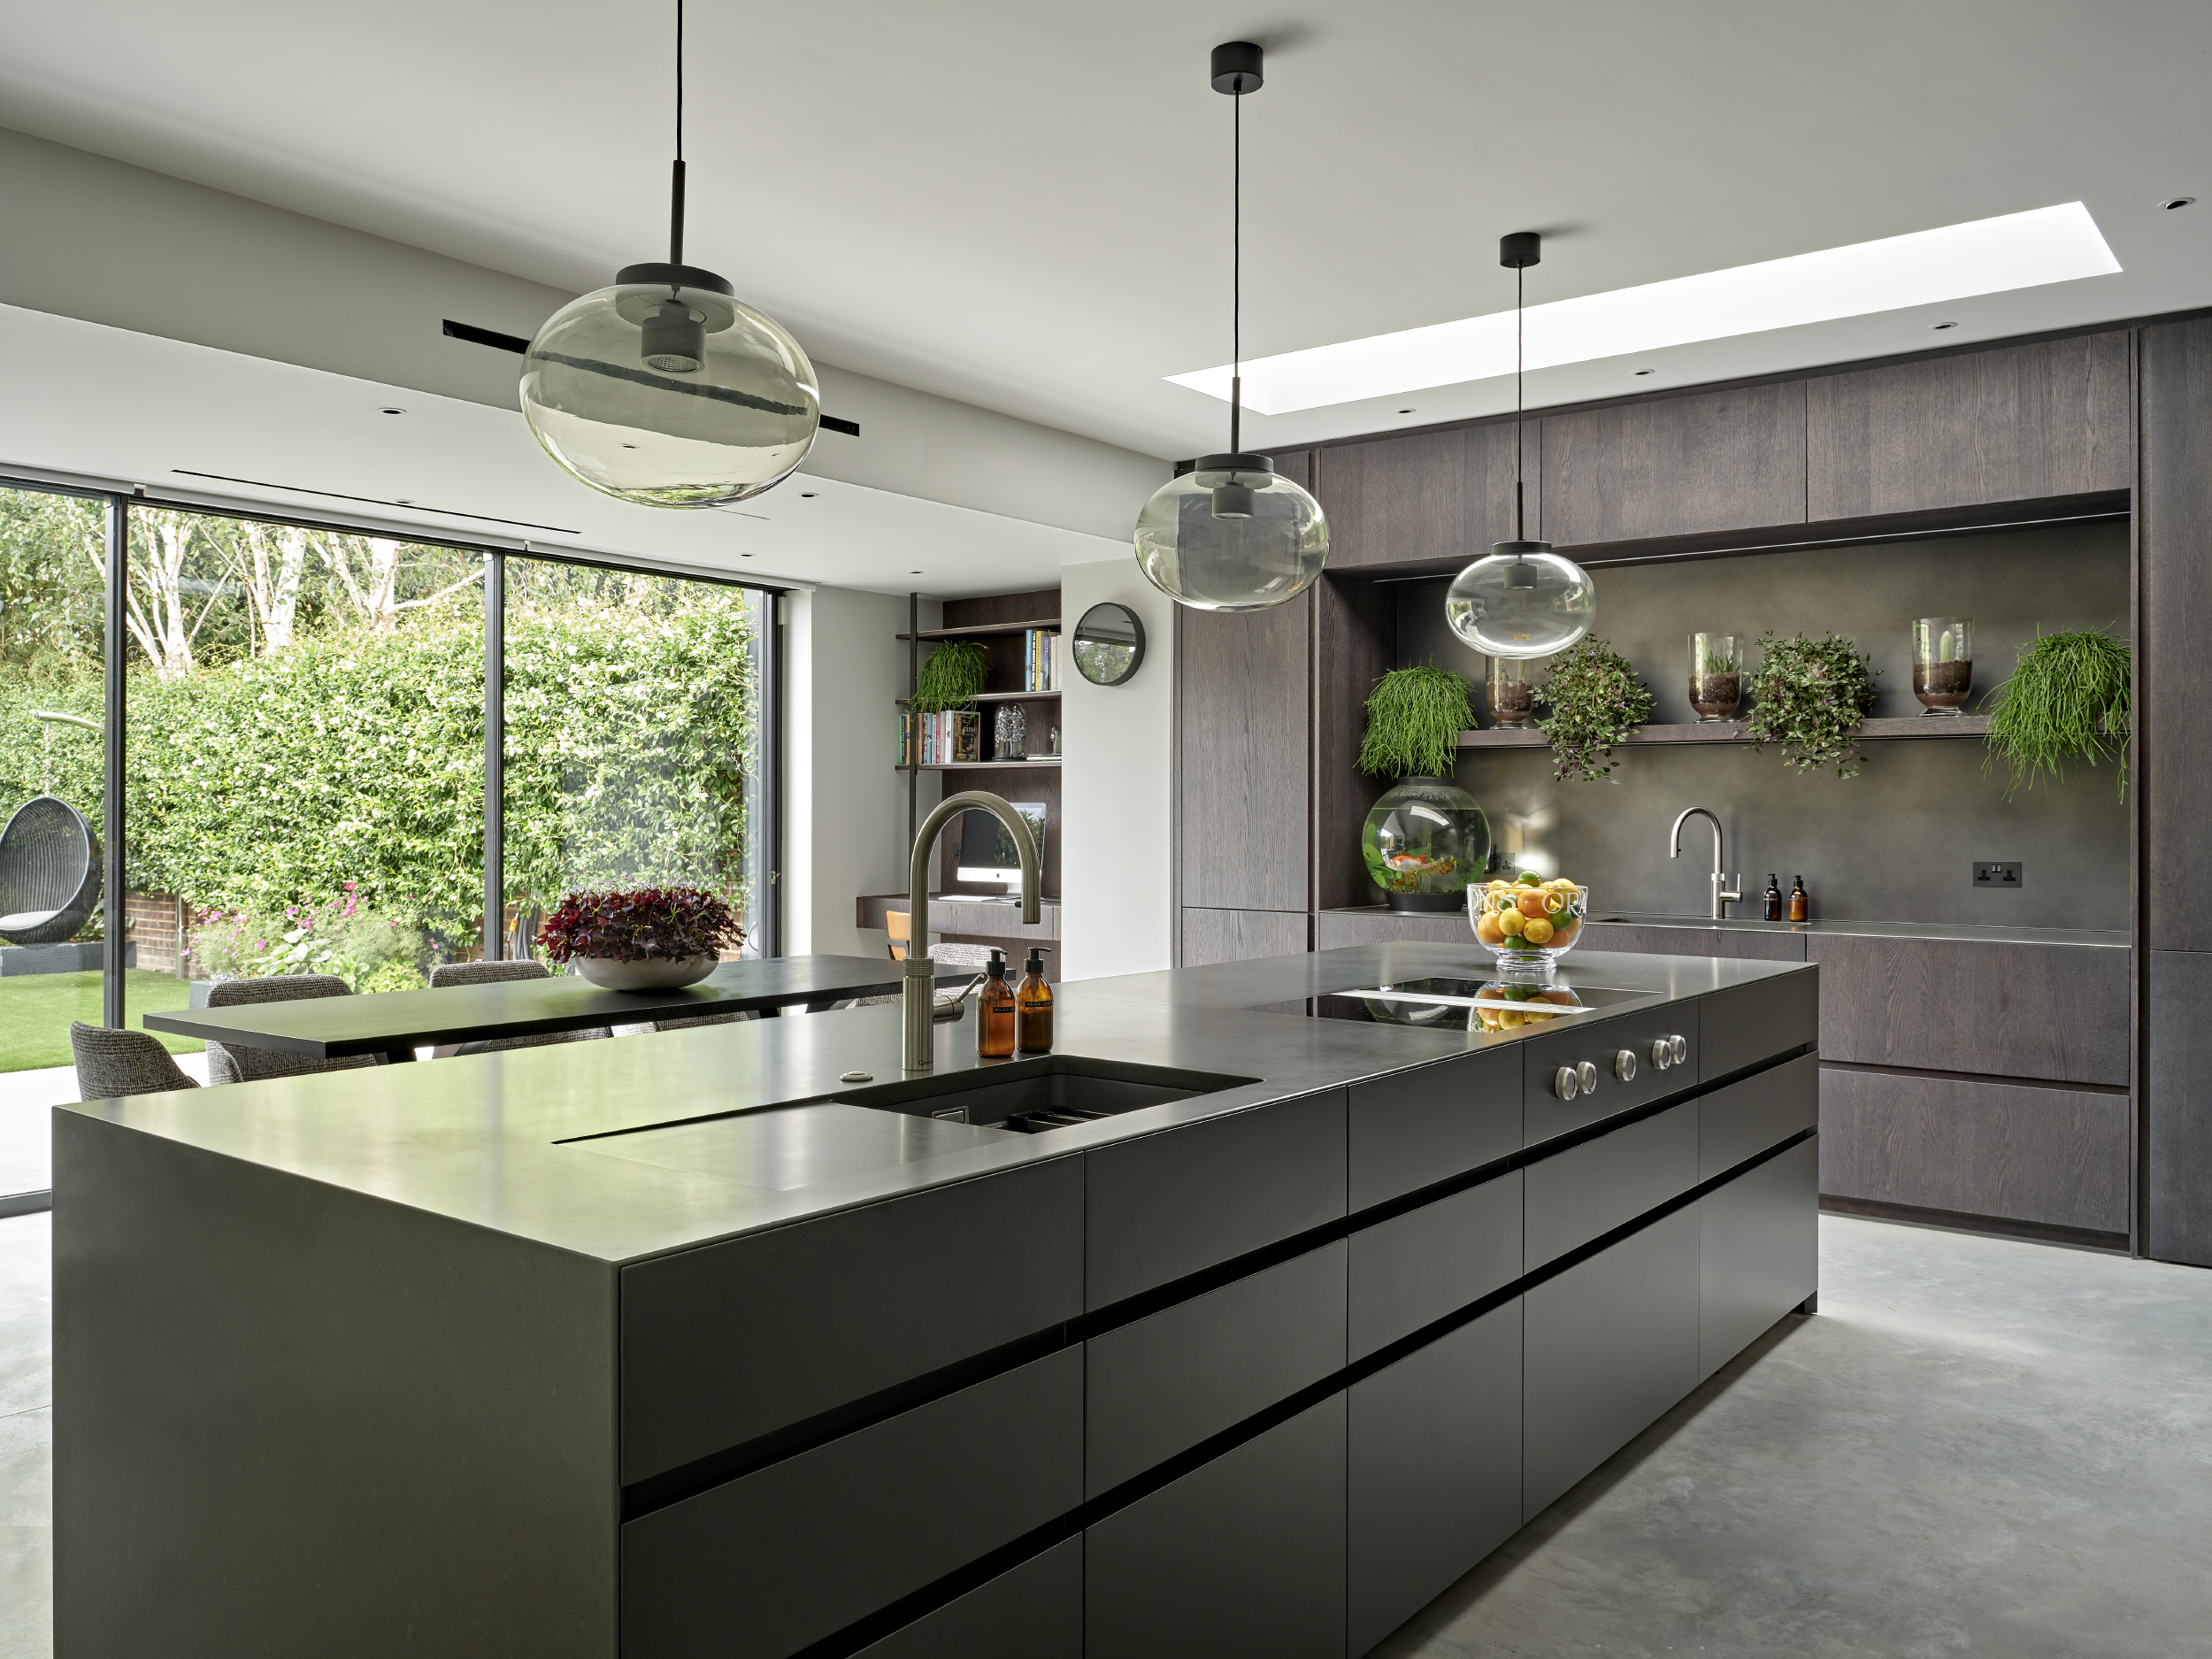 Multipurpose Living Within A Highly Functional Kitchen